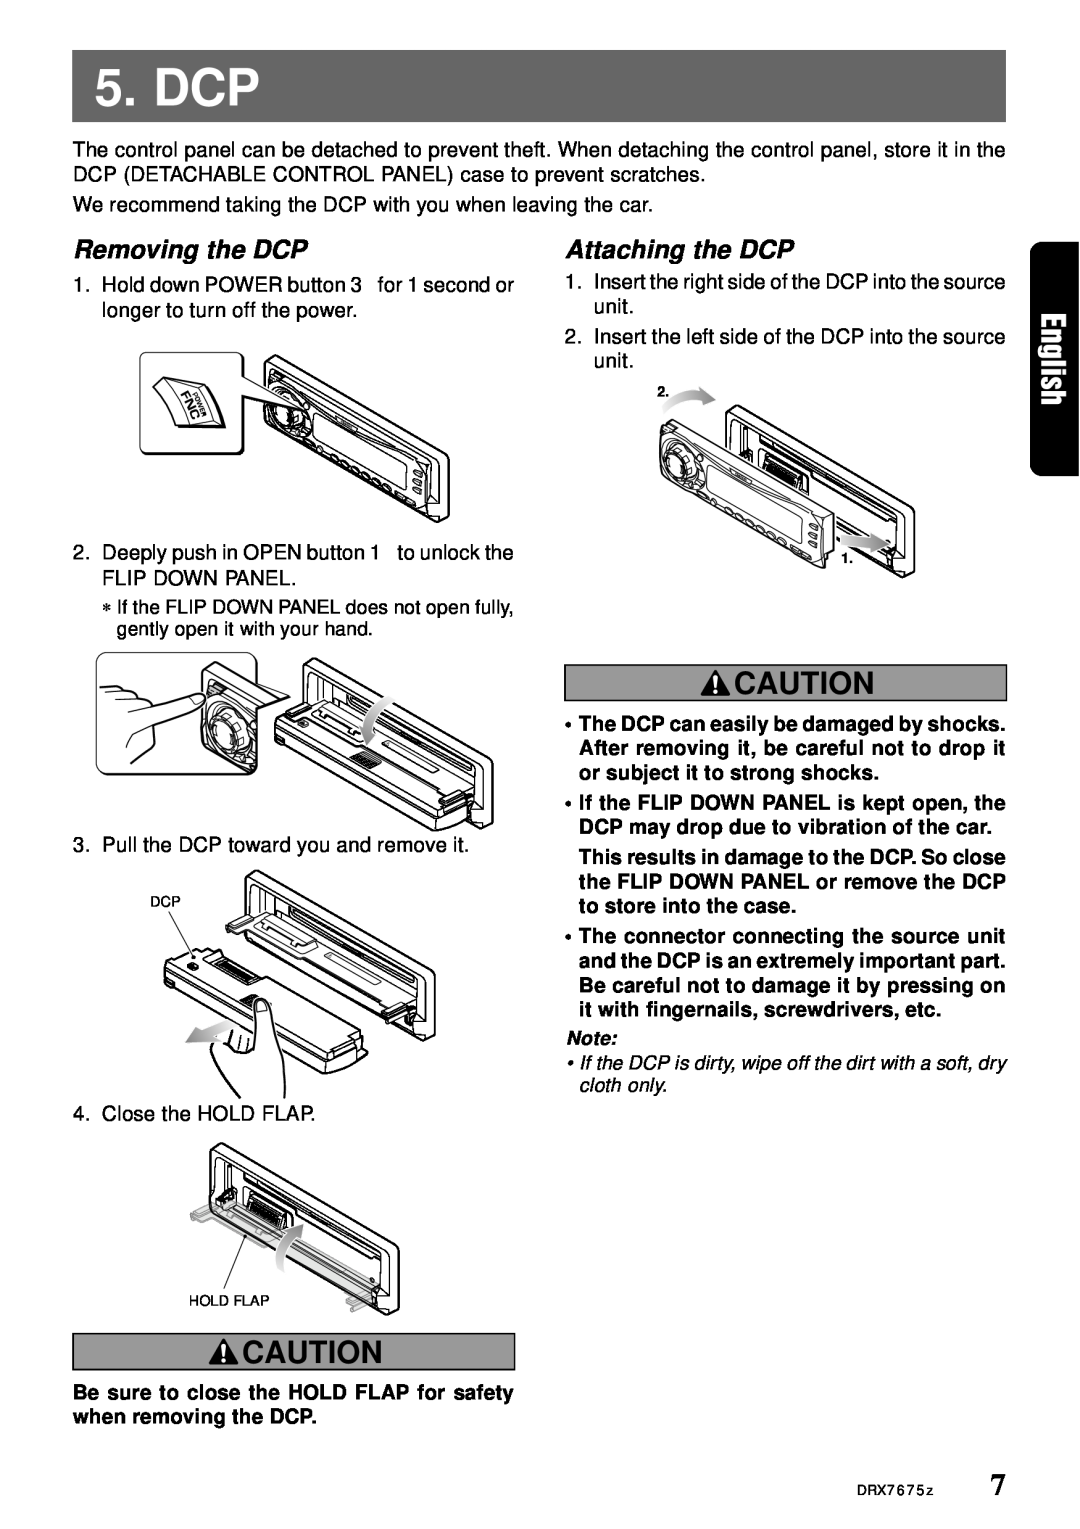 Clarion DRX7675Z owner manual Dcp, Removing the DCP, Attaching the DCP 